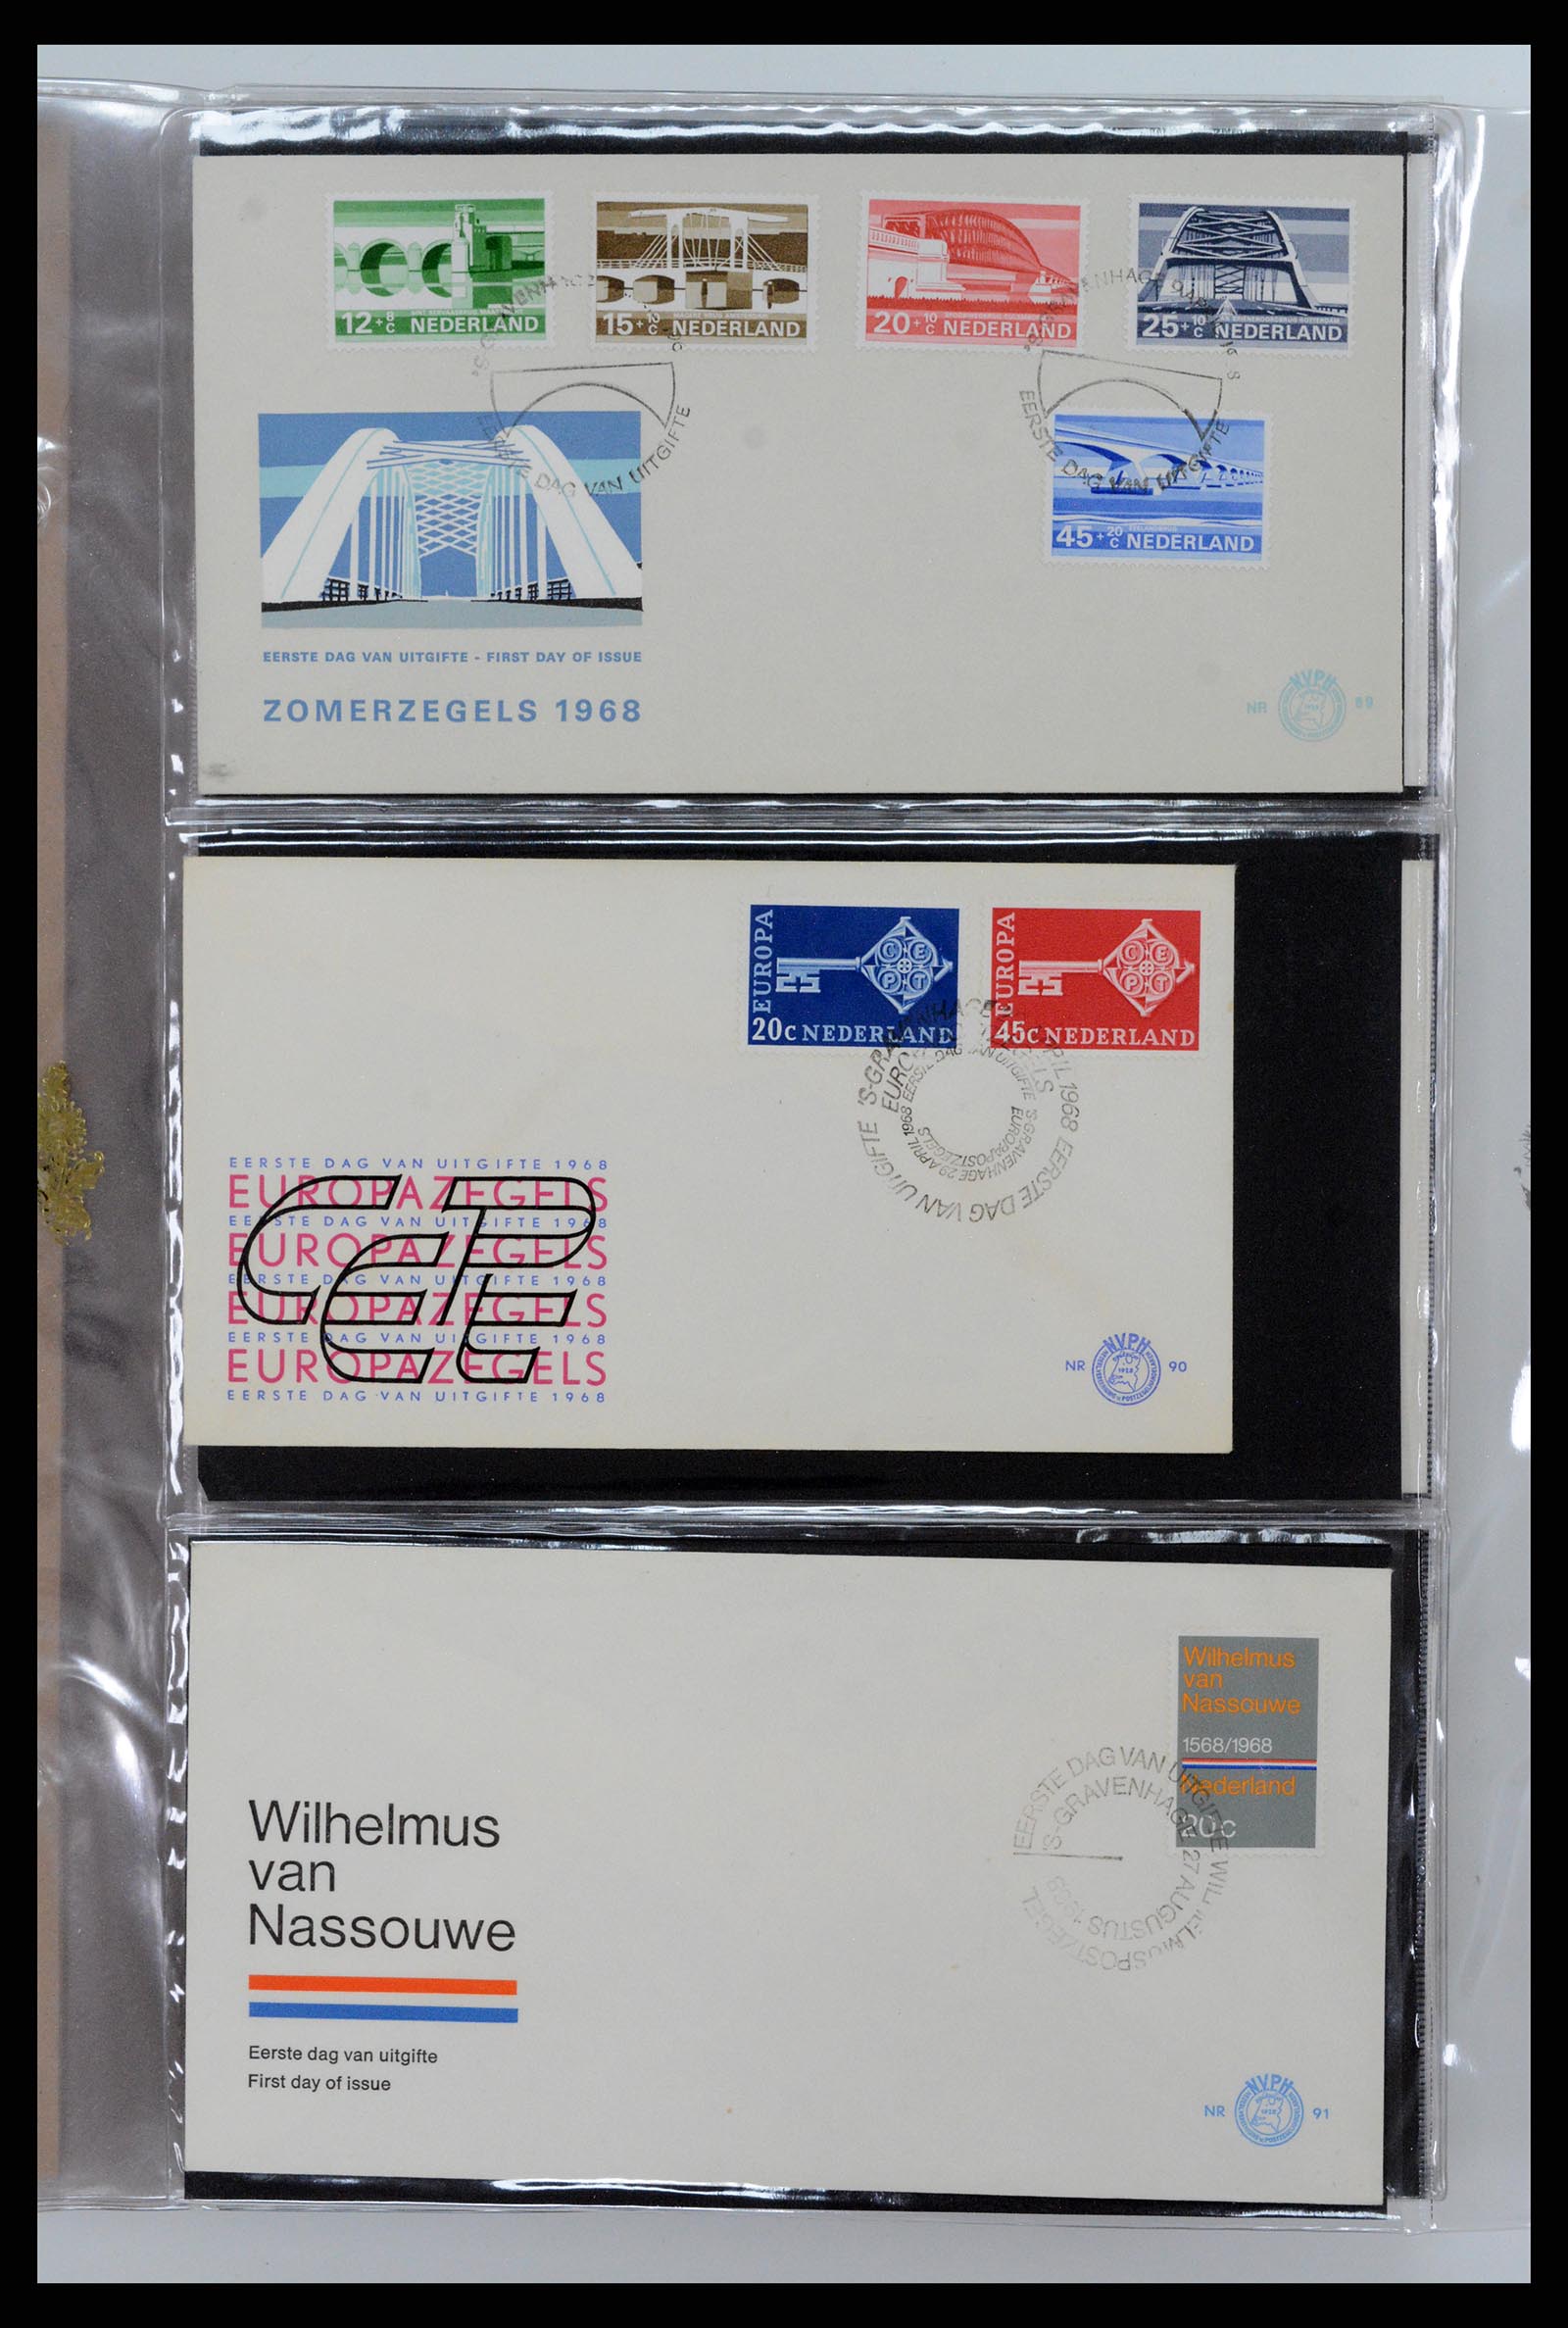 37461 032 - Stamp collection 37461 Netherlands FDC's 1950-2014.